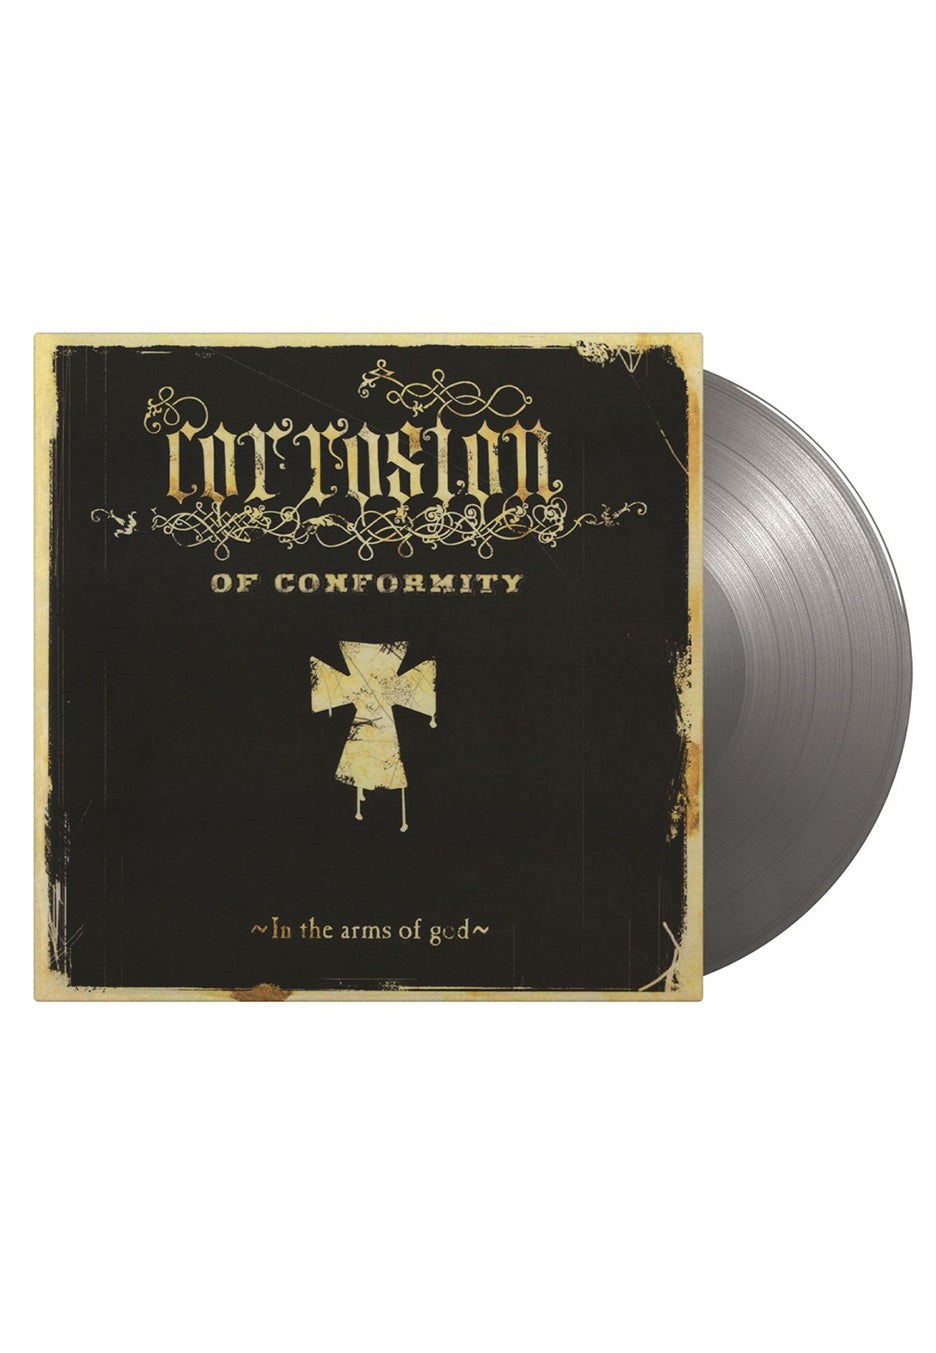 Corrosion Of Conformity - In The Arms Of God Ltd. Silver - Colored 2 Vinyl